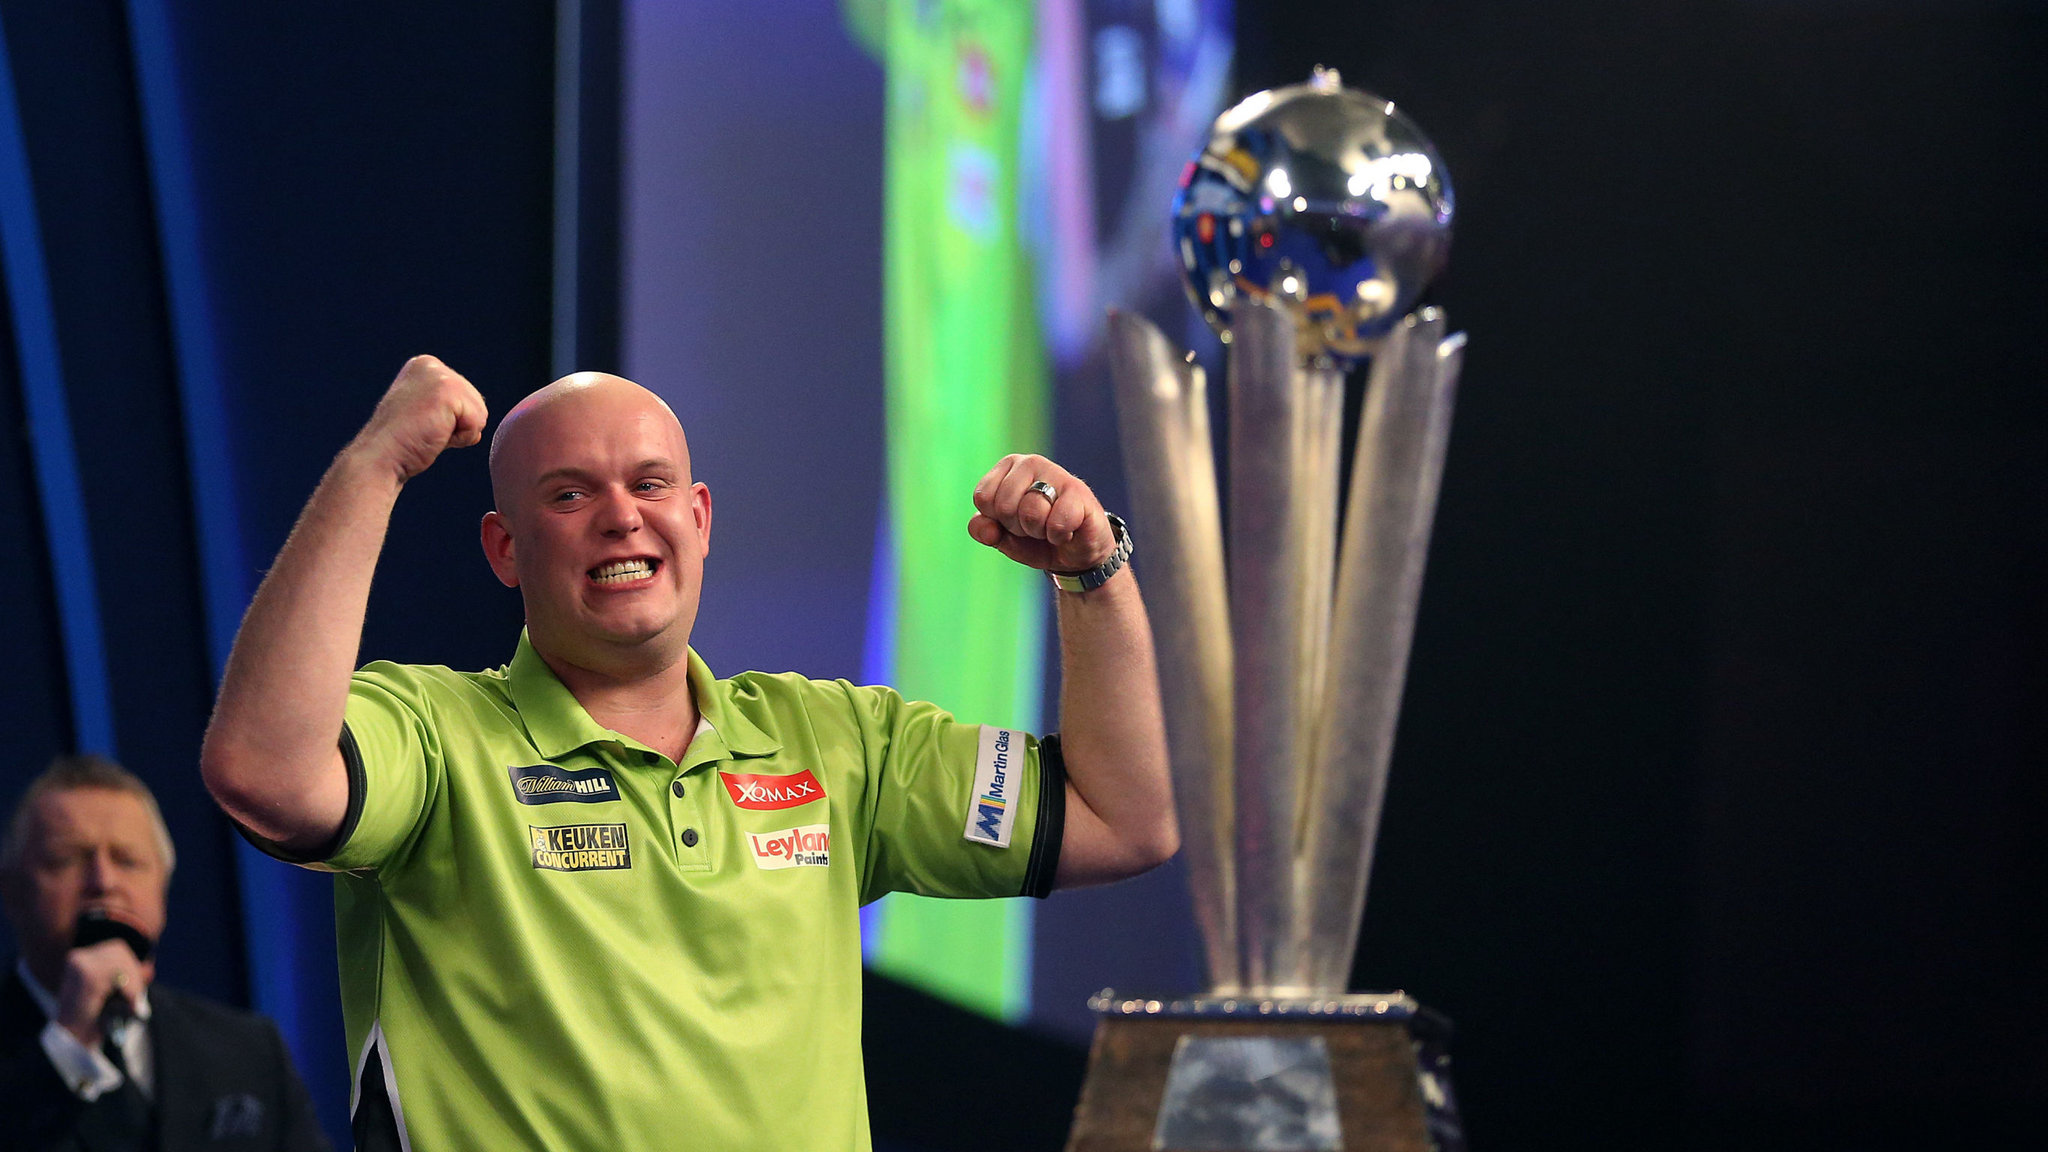 PDC World Darts Championship Schedule & results